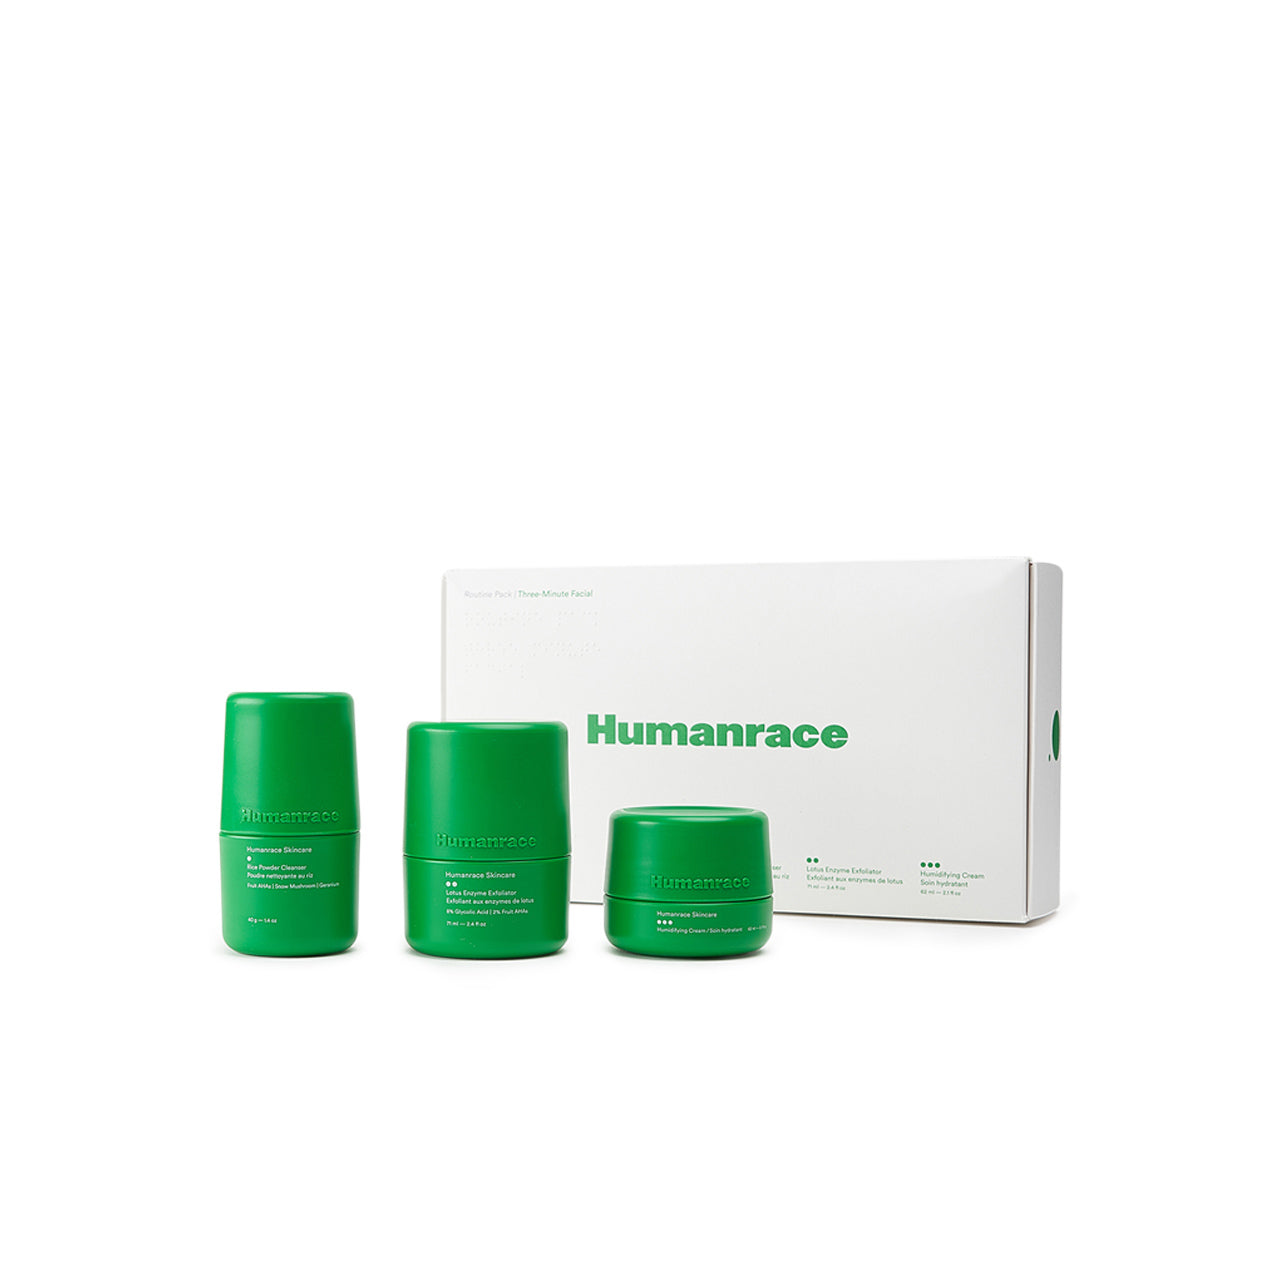 humanrace routine pack: three minute facial